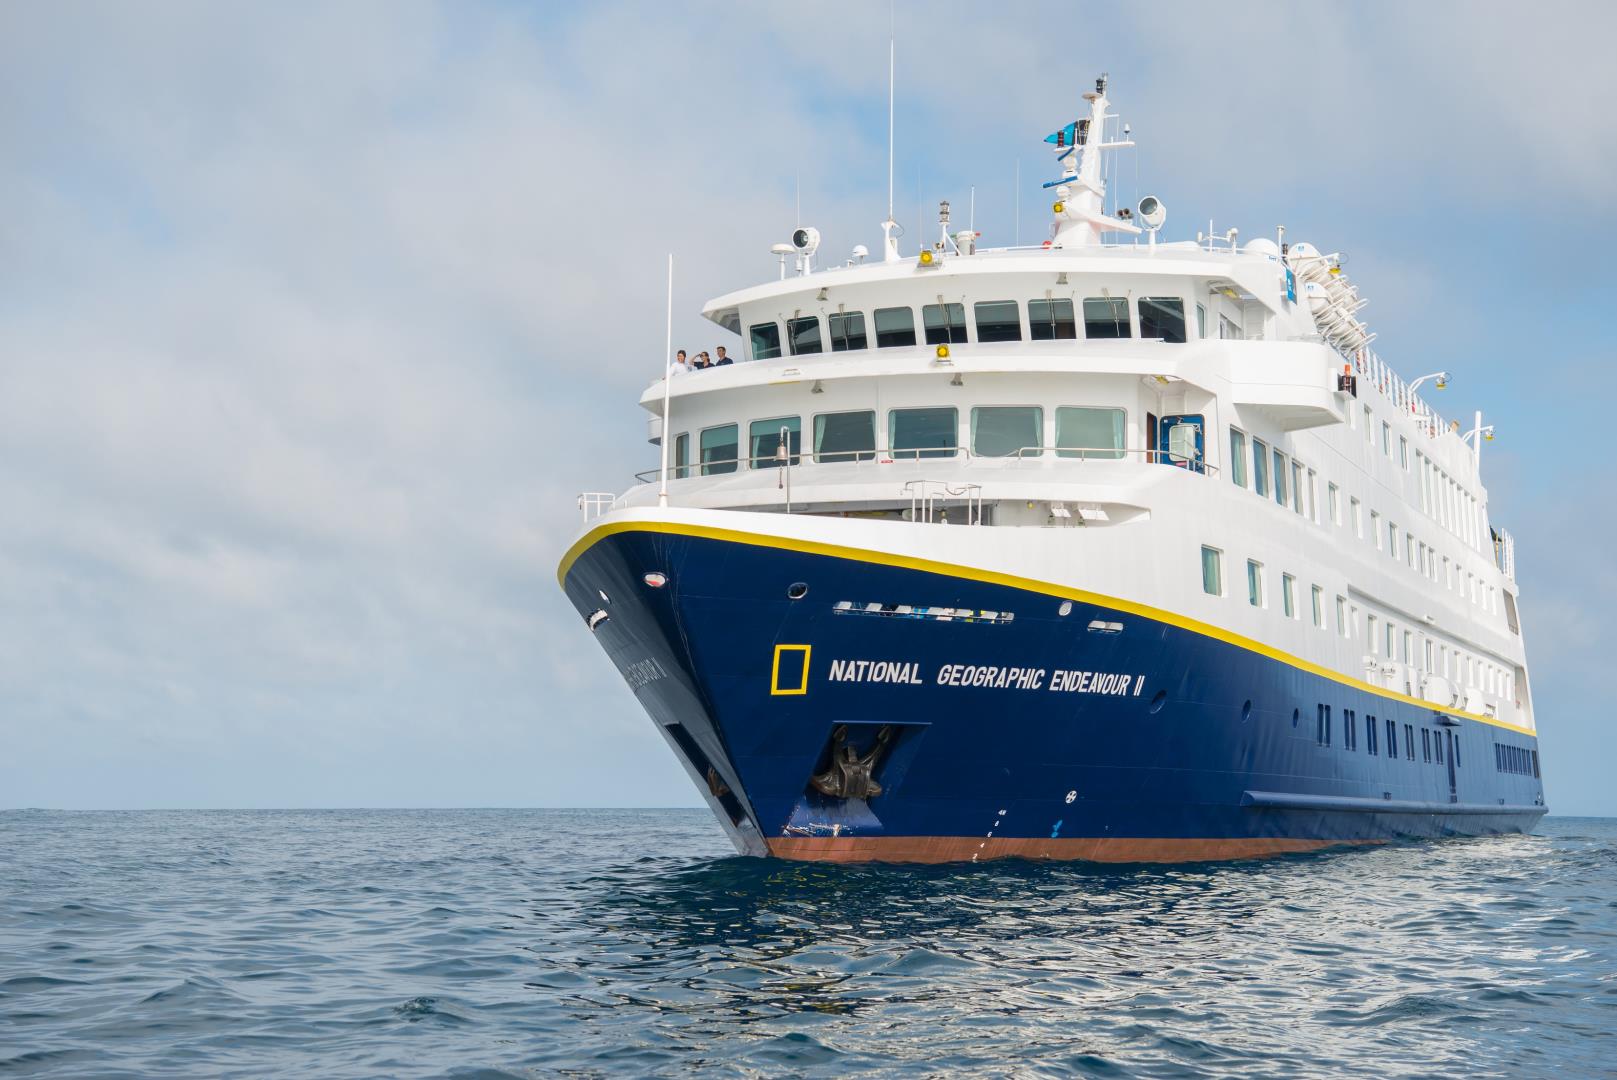 Exterior of National Geographic Endeavour II